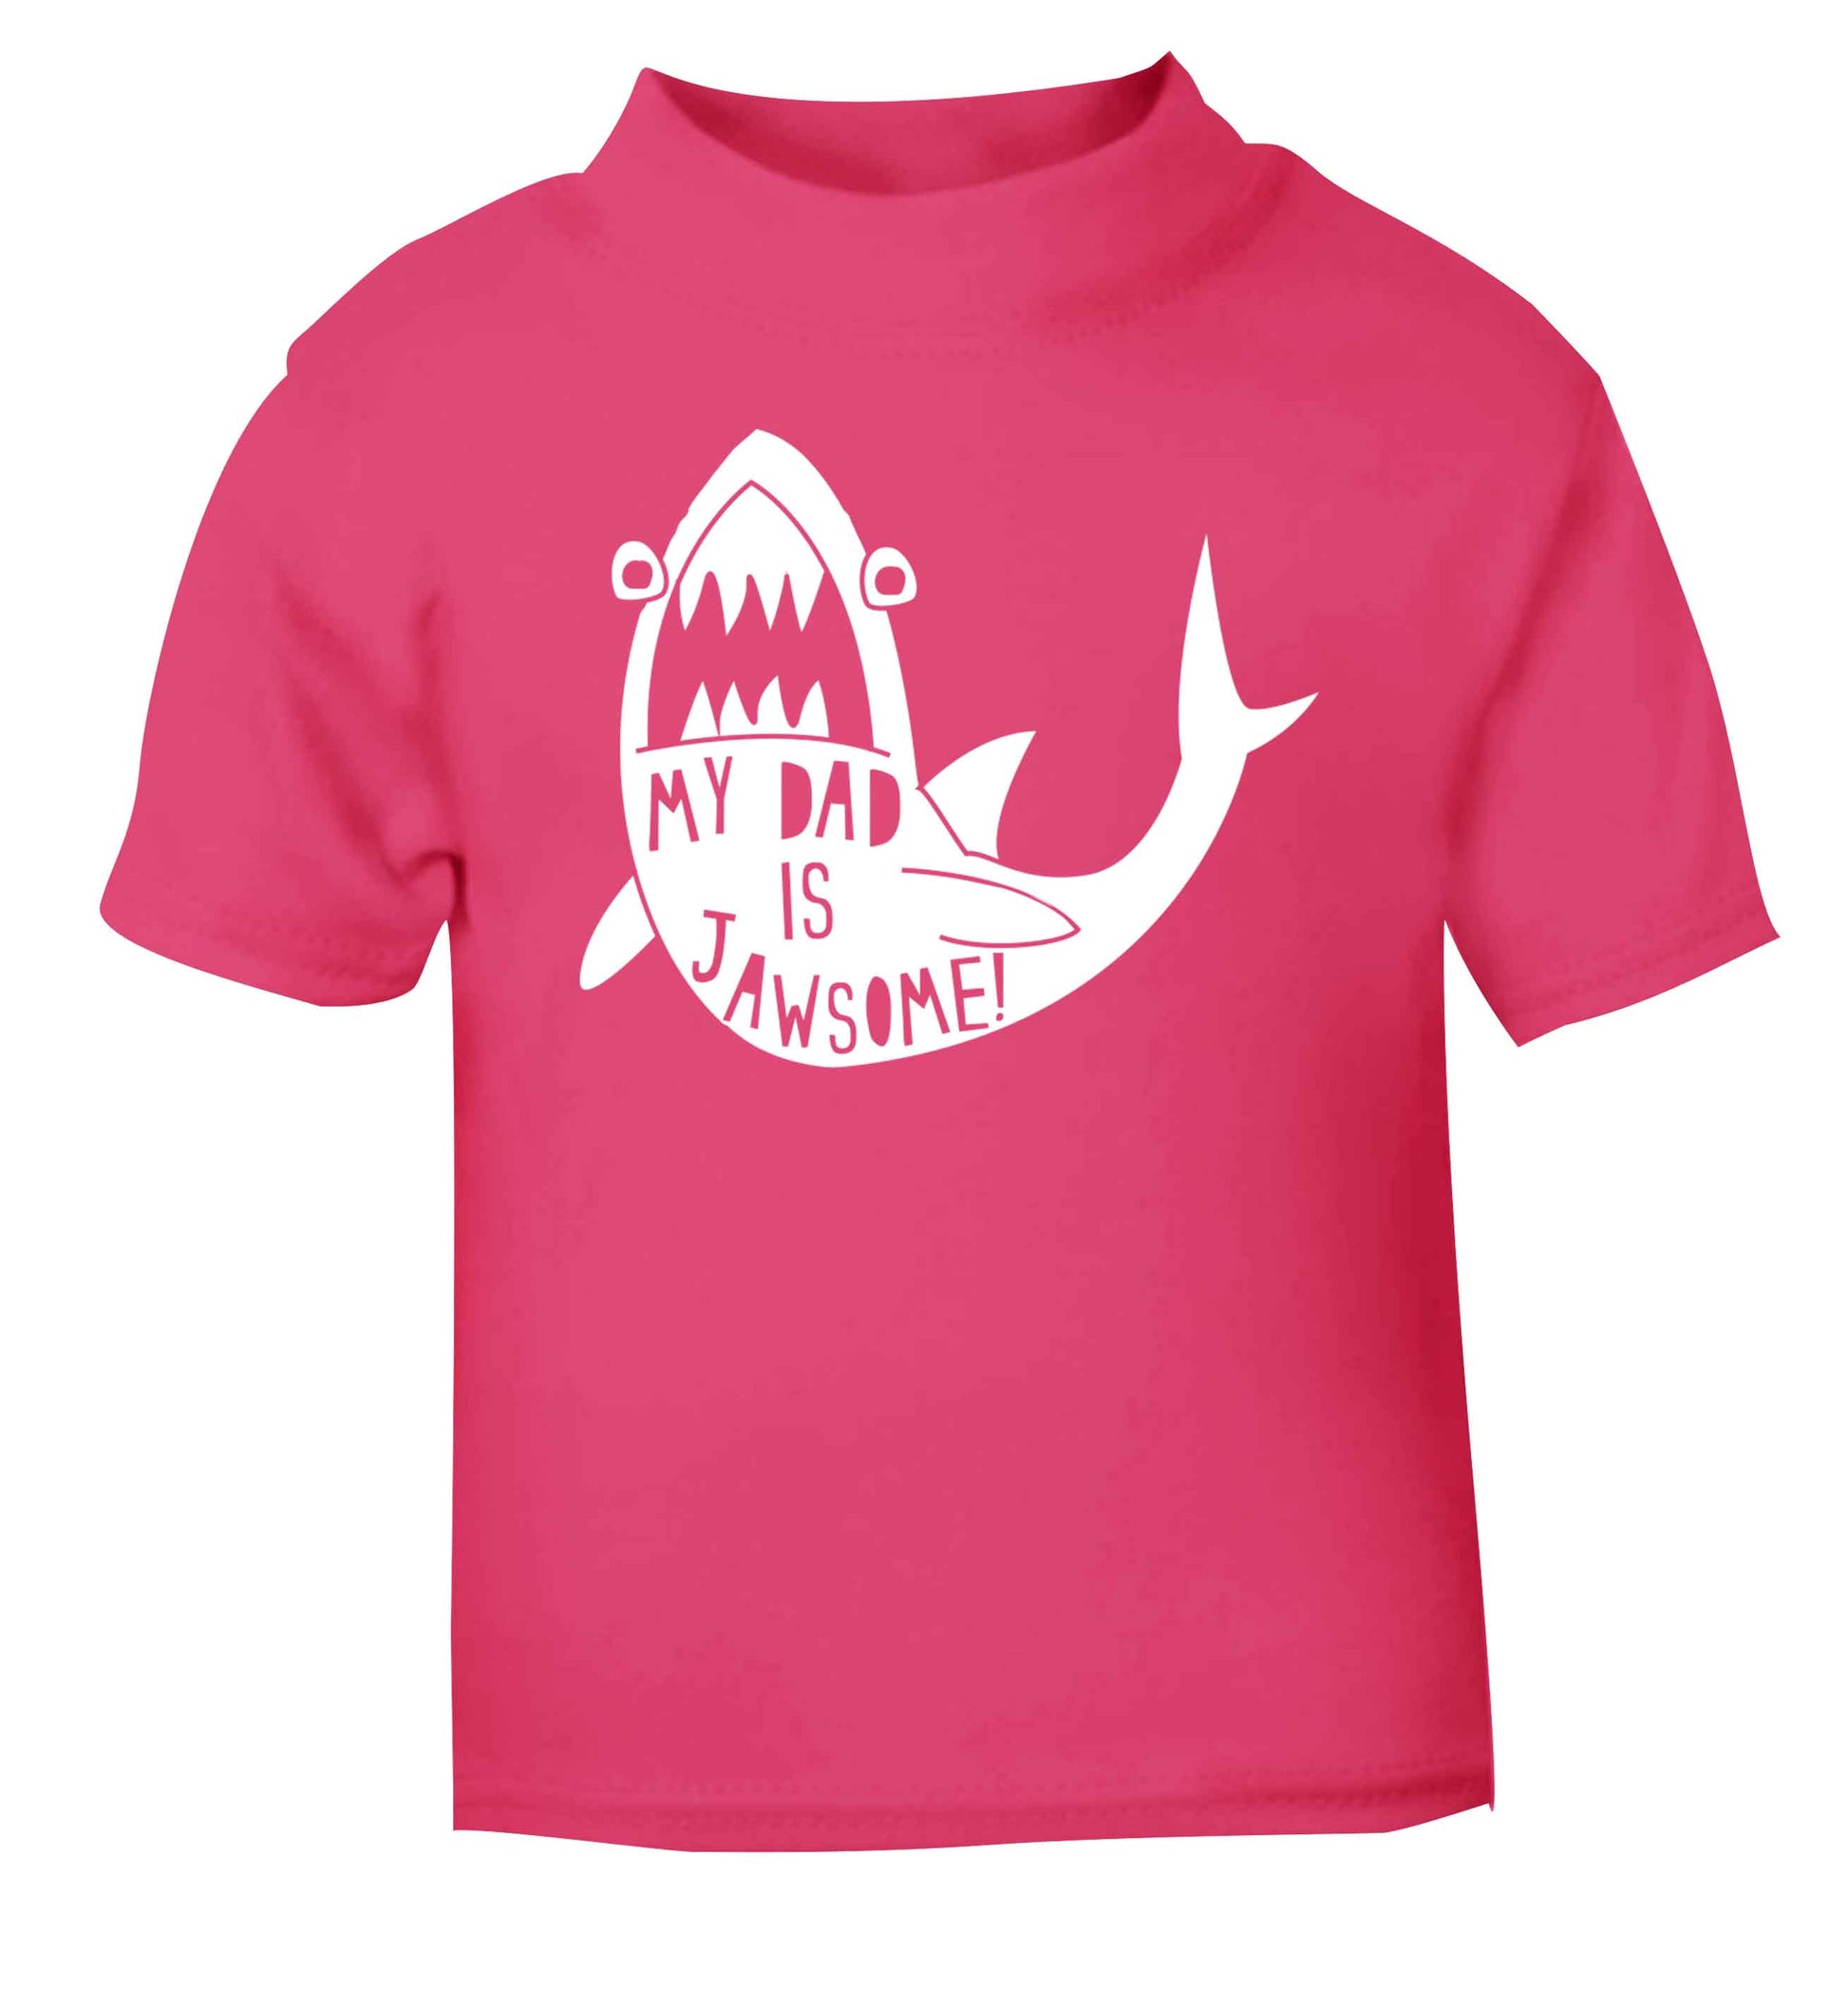 My Dad is jawsome pink baby toddler Tshirt 2 Years